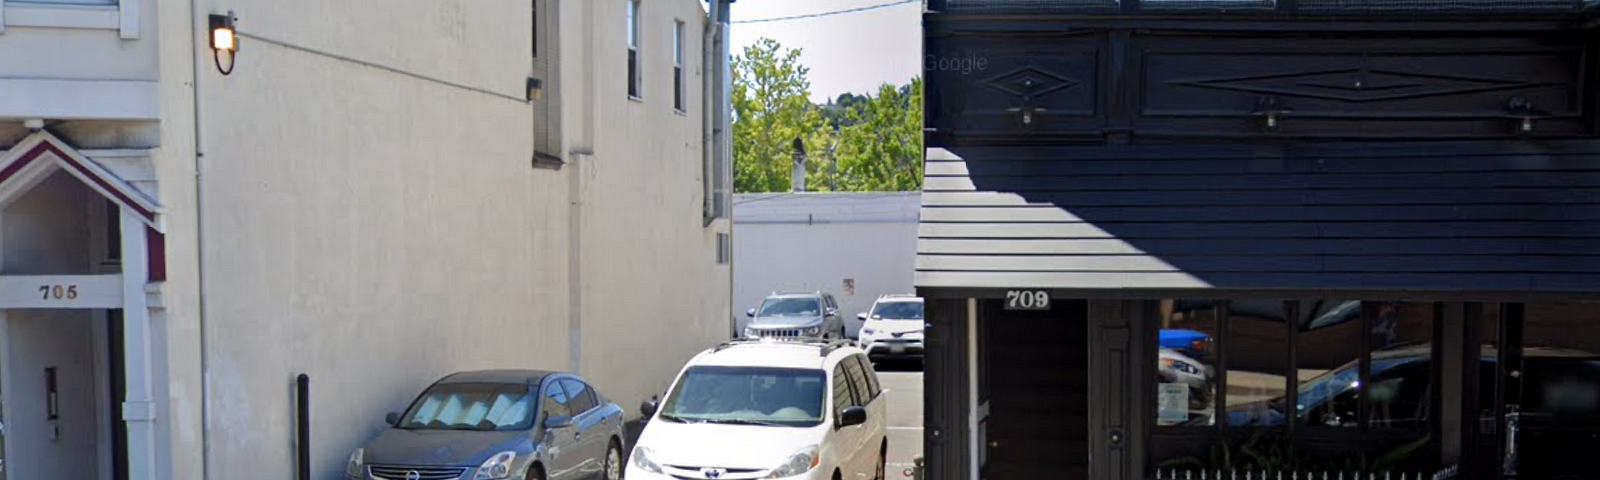 A parking lot on the 700 block of 4th Street in San Rafael, California, near where Ashley Yamauchi’s body was discovered